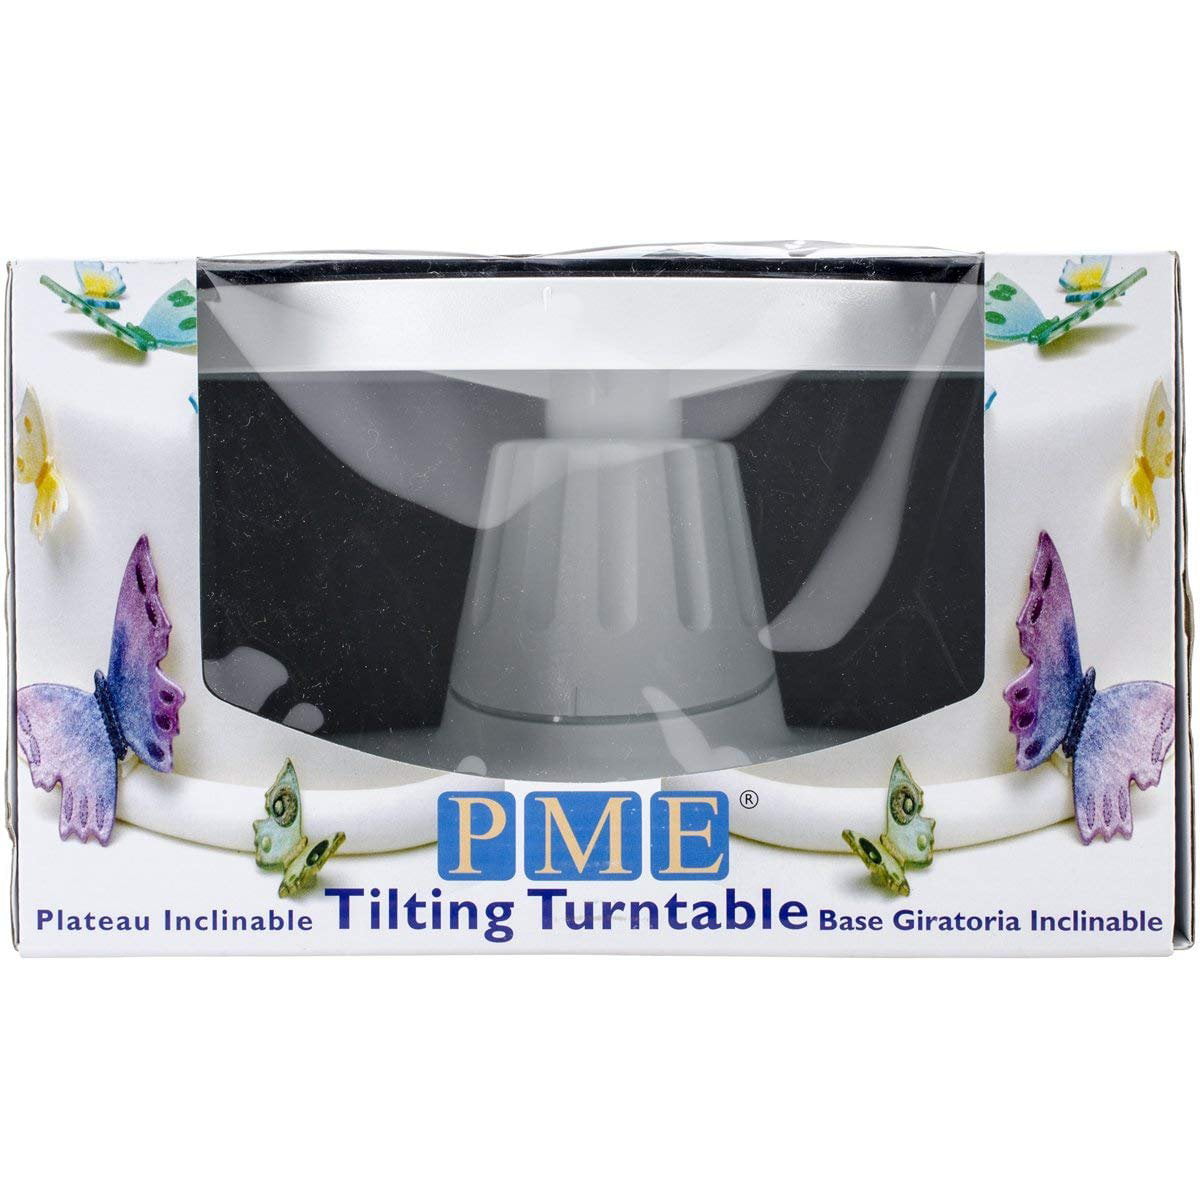 White Standard CK Products TT460 PME Tilting Turntable for Cake Decorating